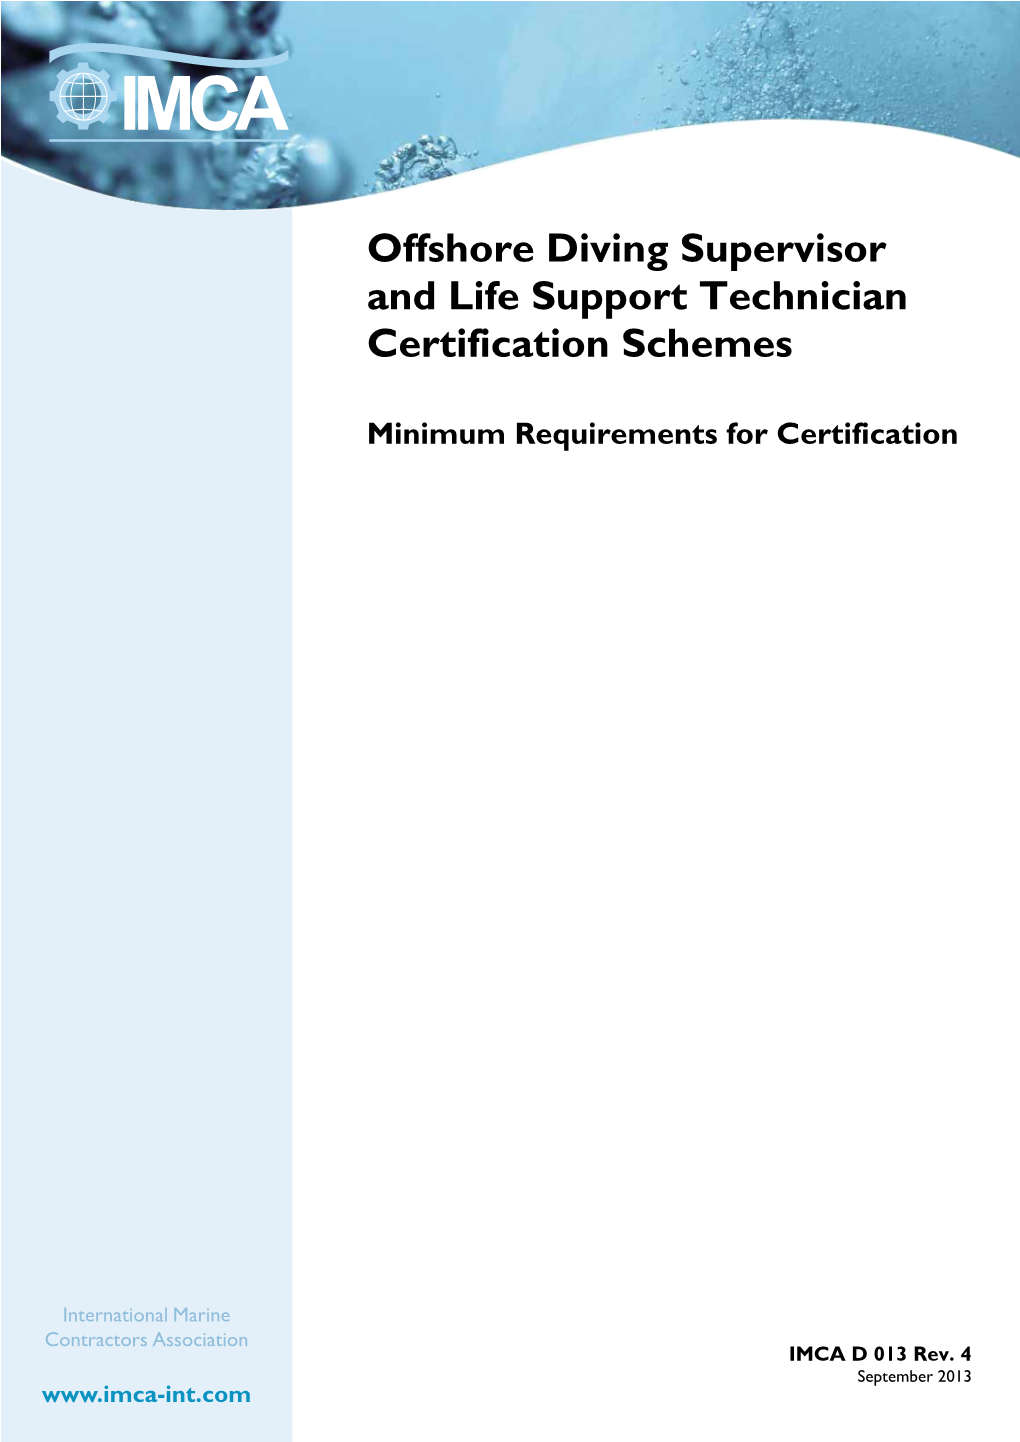 Offshore Diving Supervisor and Life Support Technician Certification Schemes